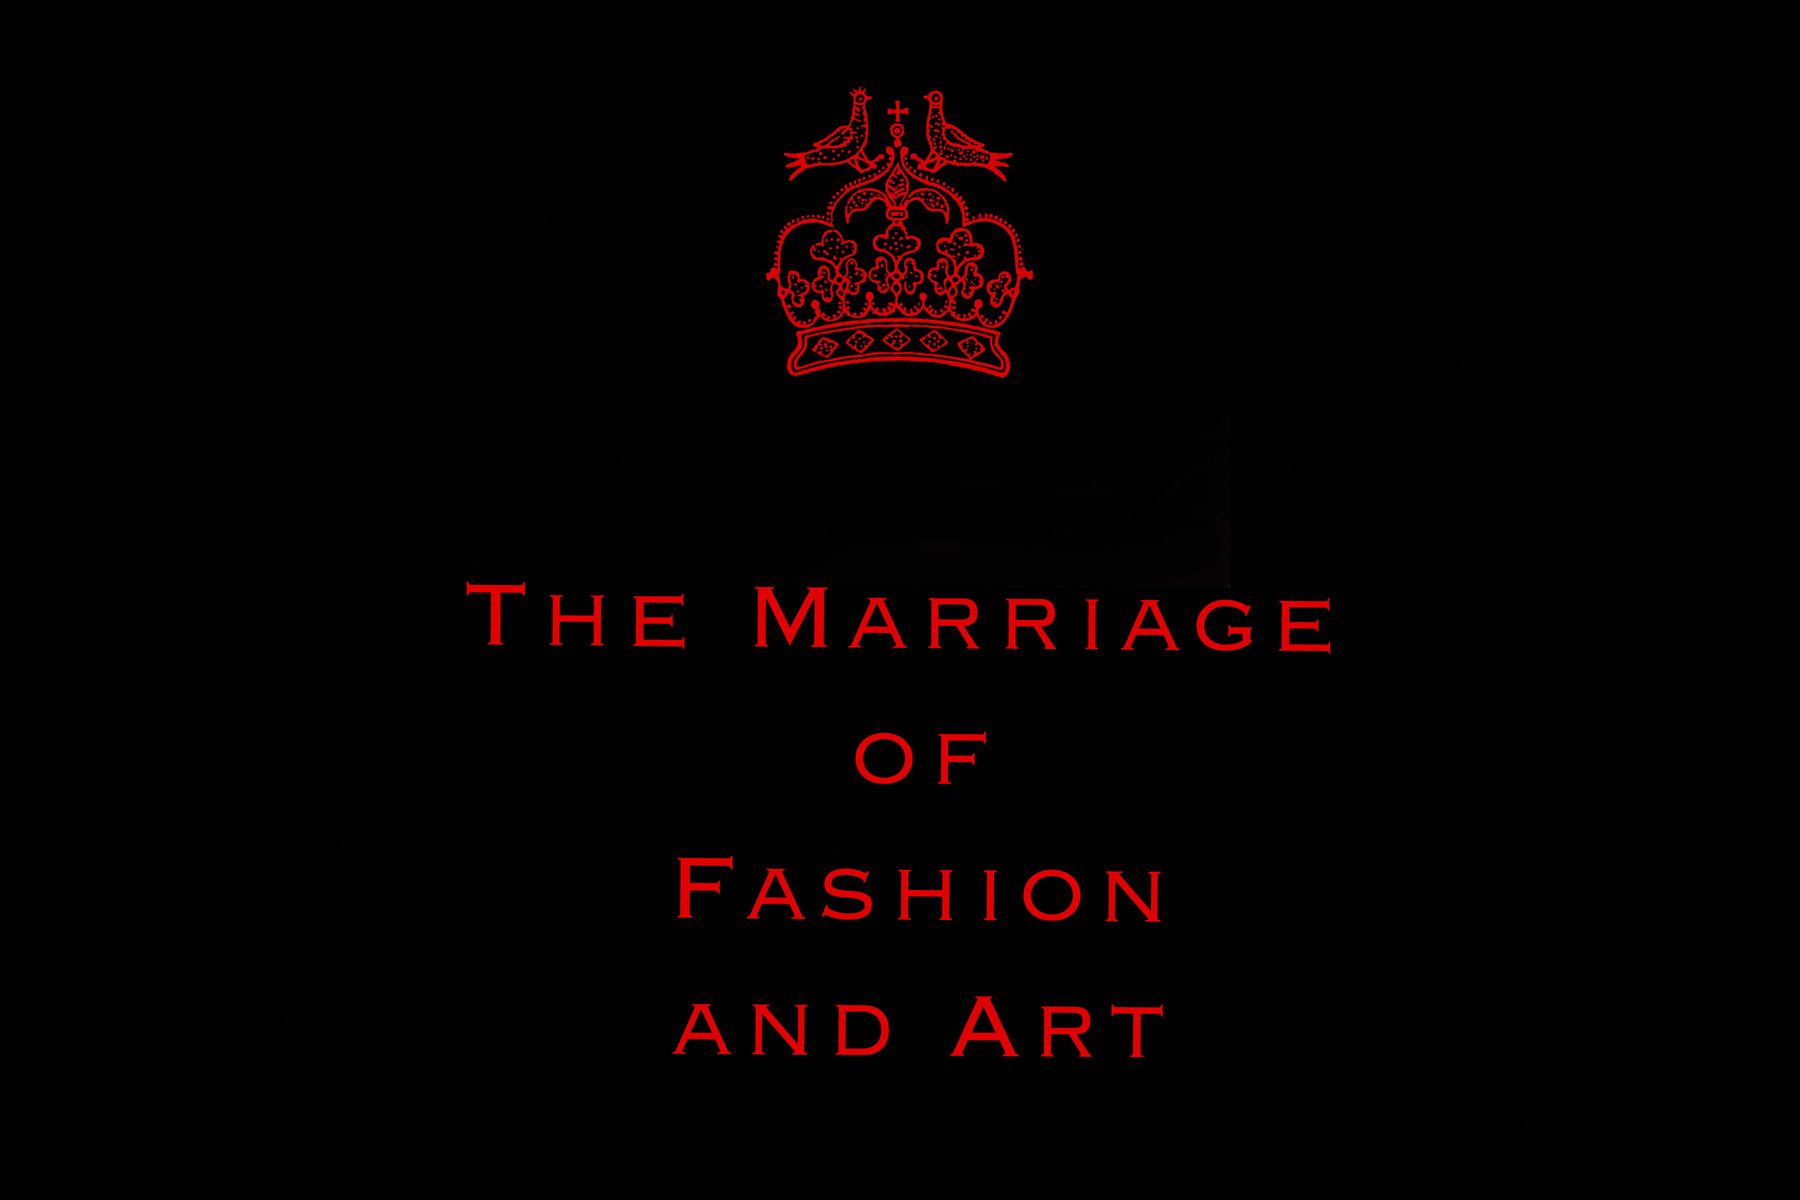 The Marriage of Fashion and Art